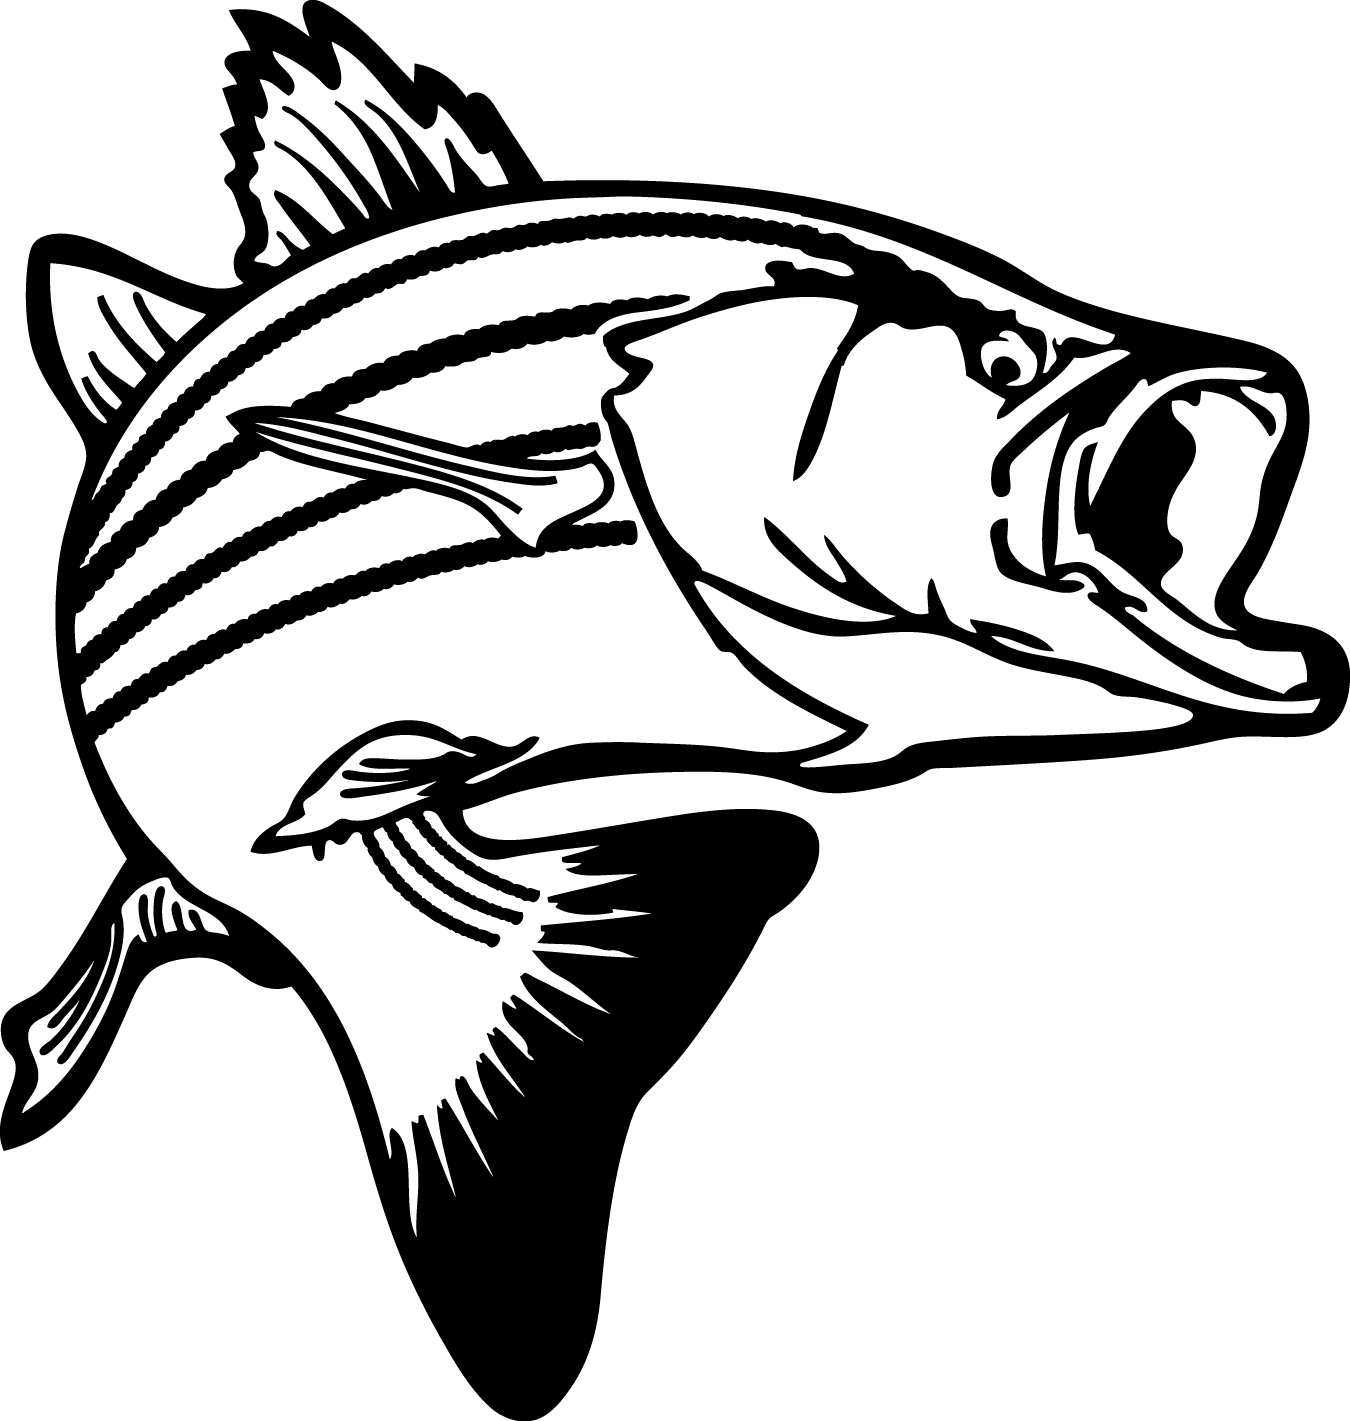 Black and White Bass Logo - Free Bass Cliparts, Download Free Clip Art, Free Clip Art on Clipart ...